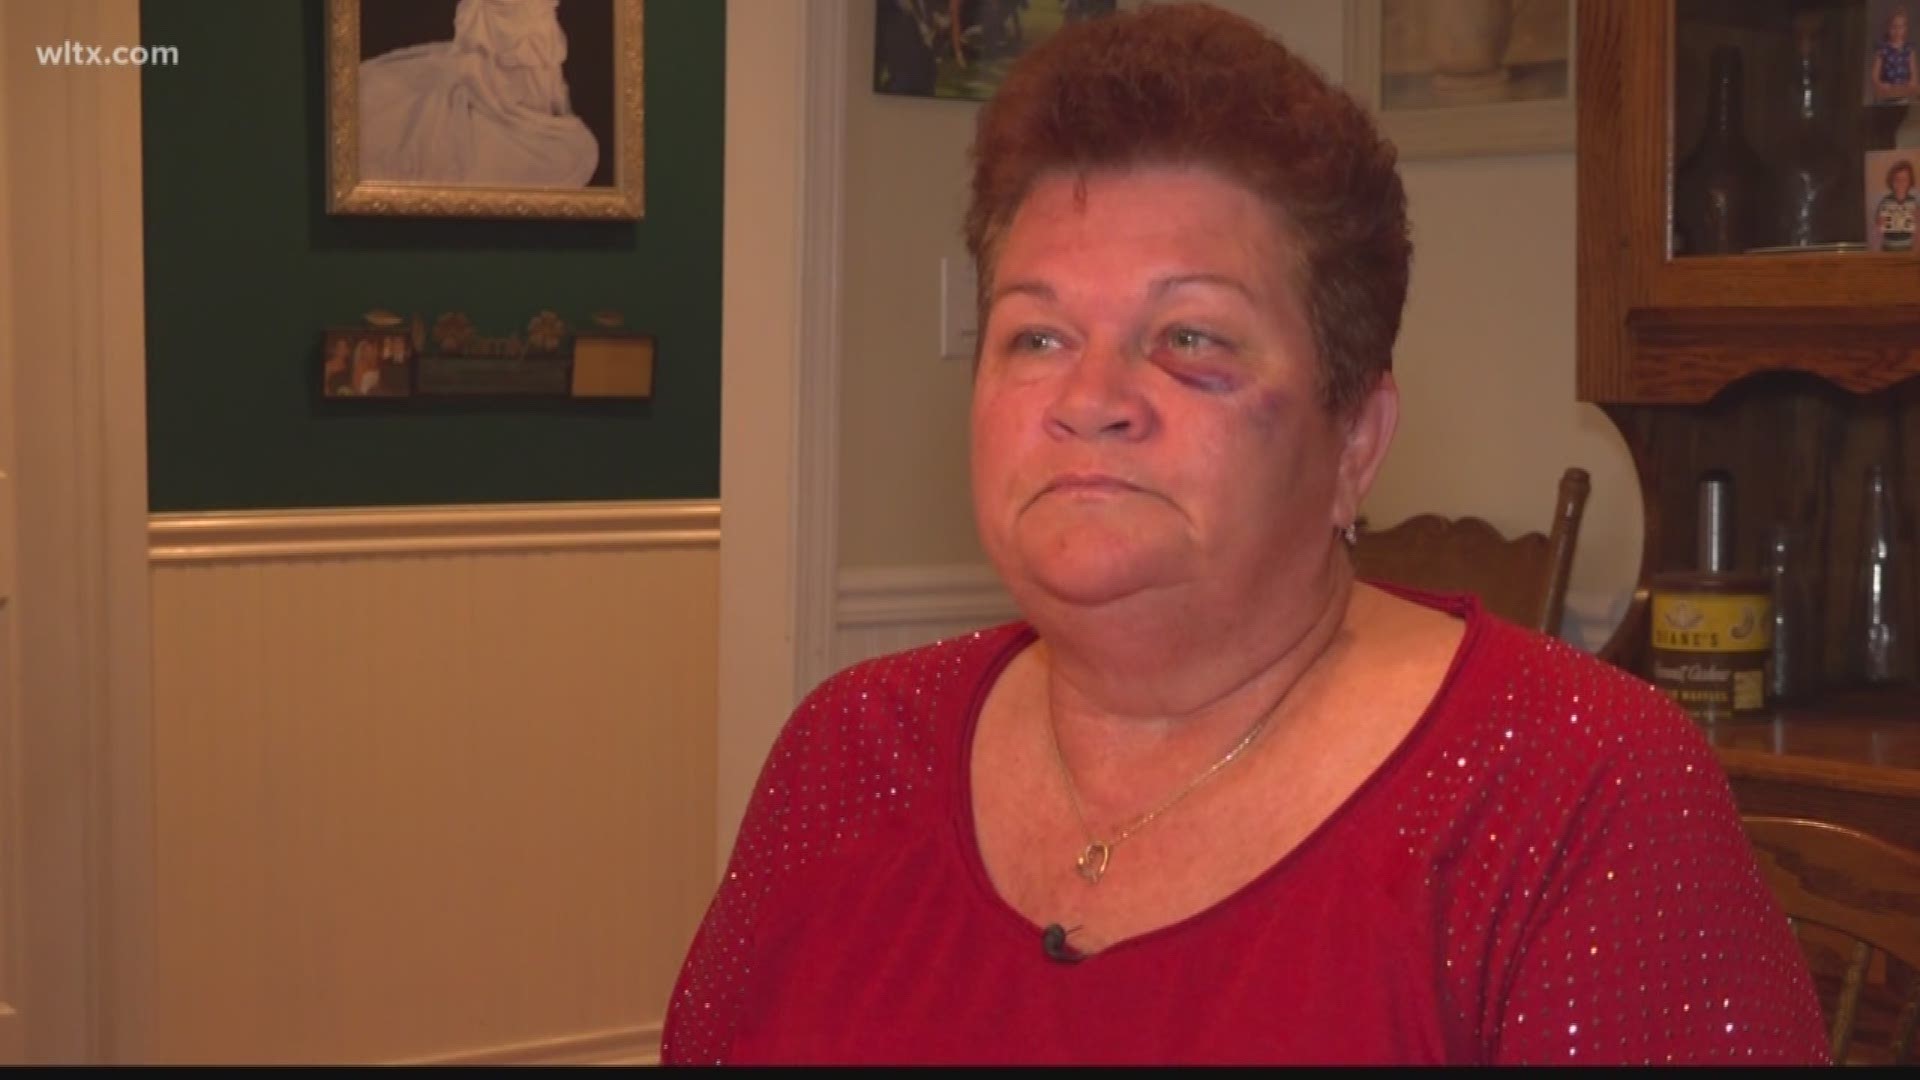 A Midlands church employee says a burglary attacked her.